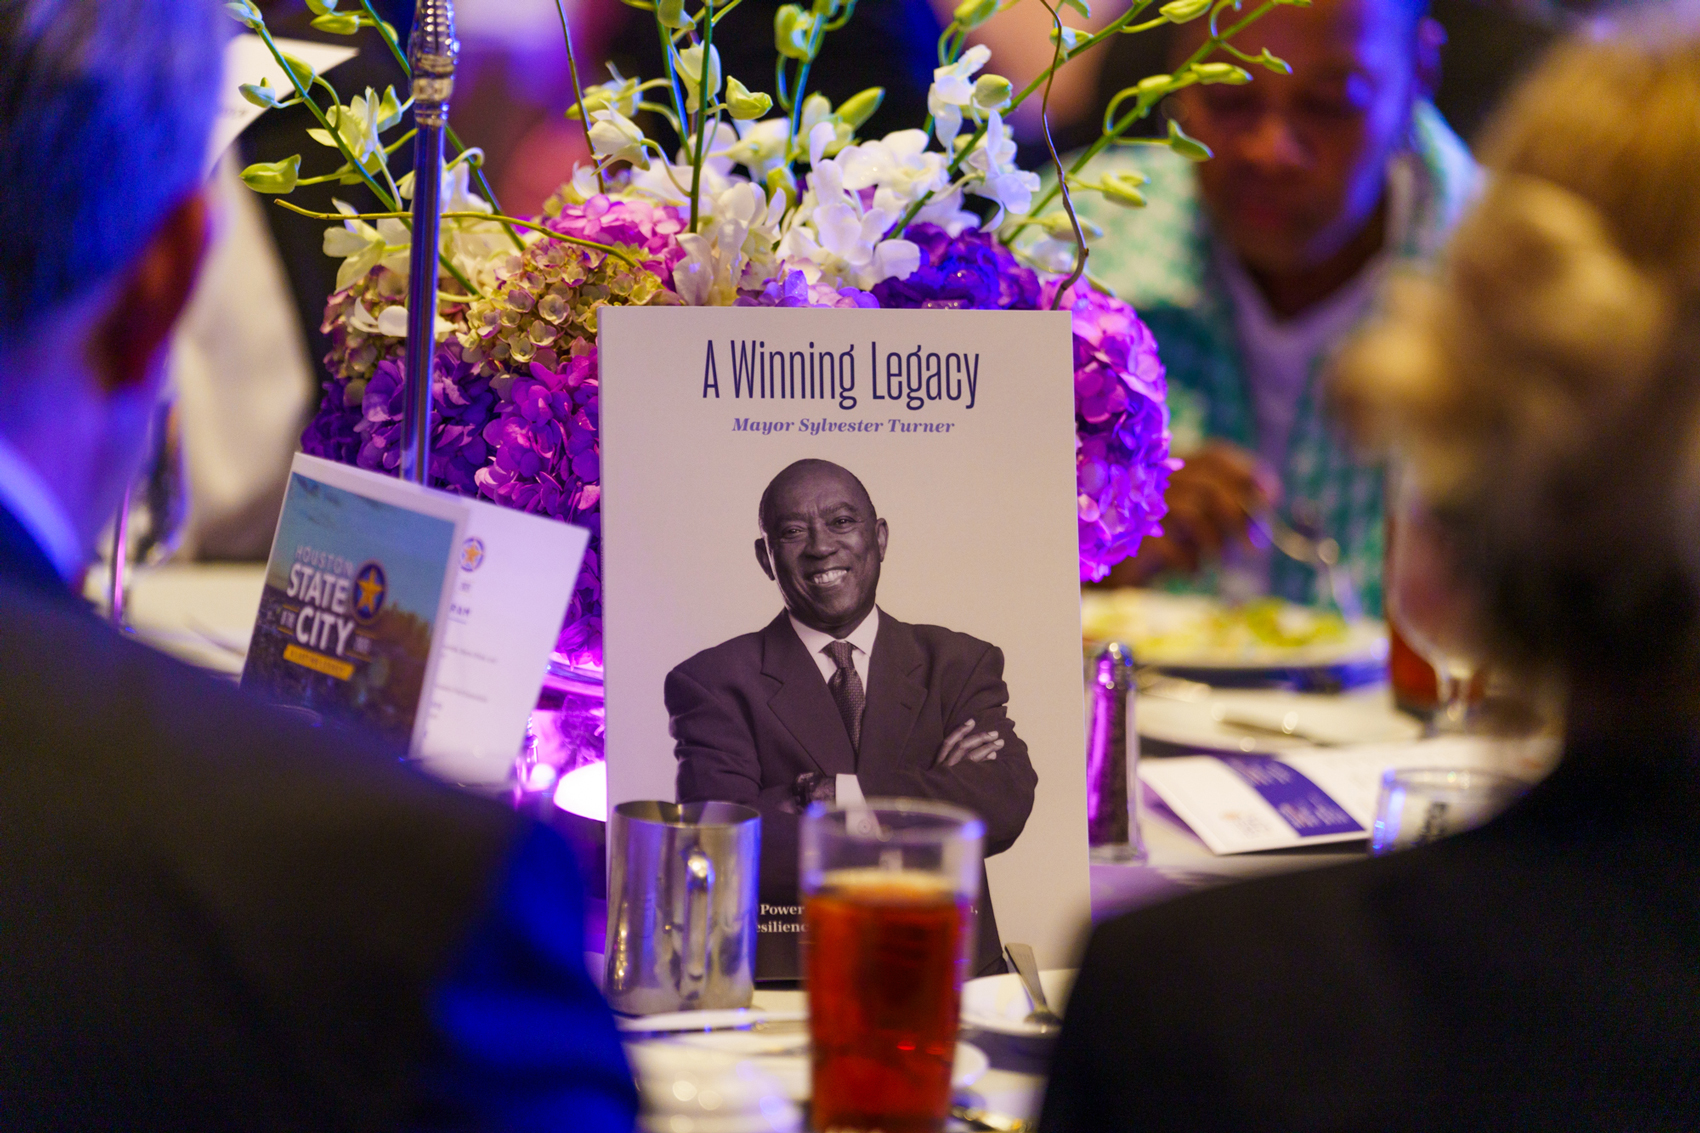 A book titled, “A Winning Legacy,” dedicated to Mayor Sylvester Turner is available at tables during his last state of the city address on Wednesday, Sept. 27, 2023, in Houston.